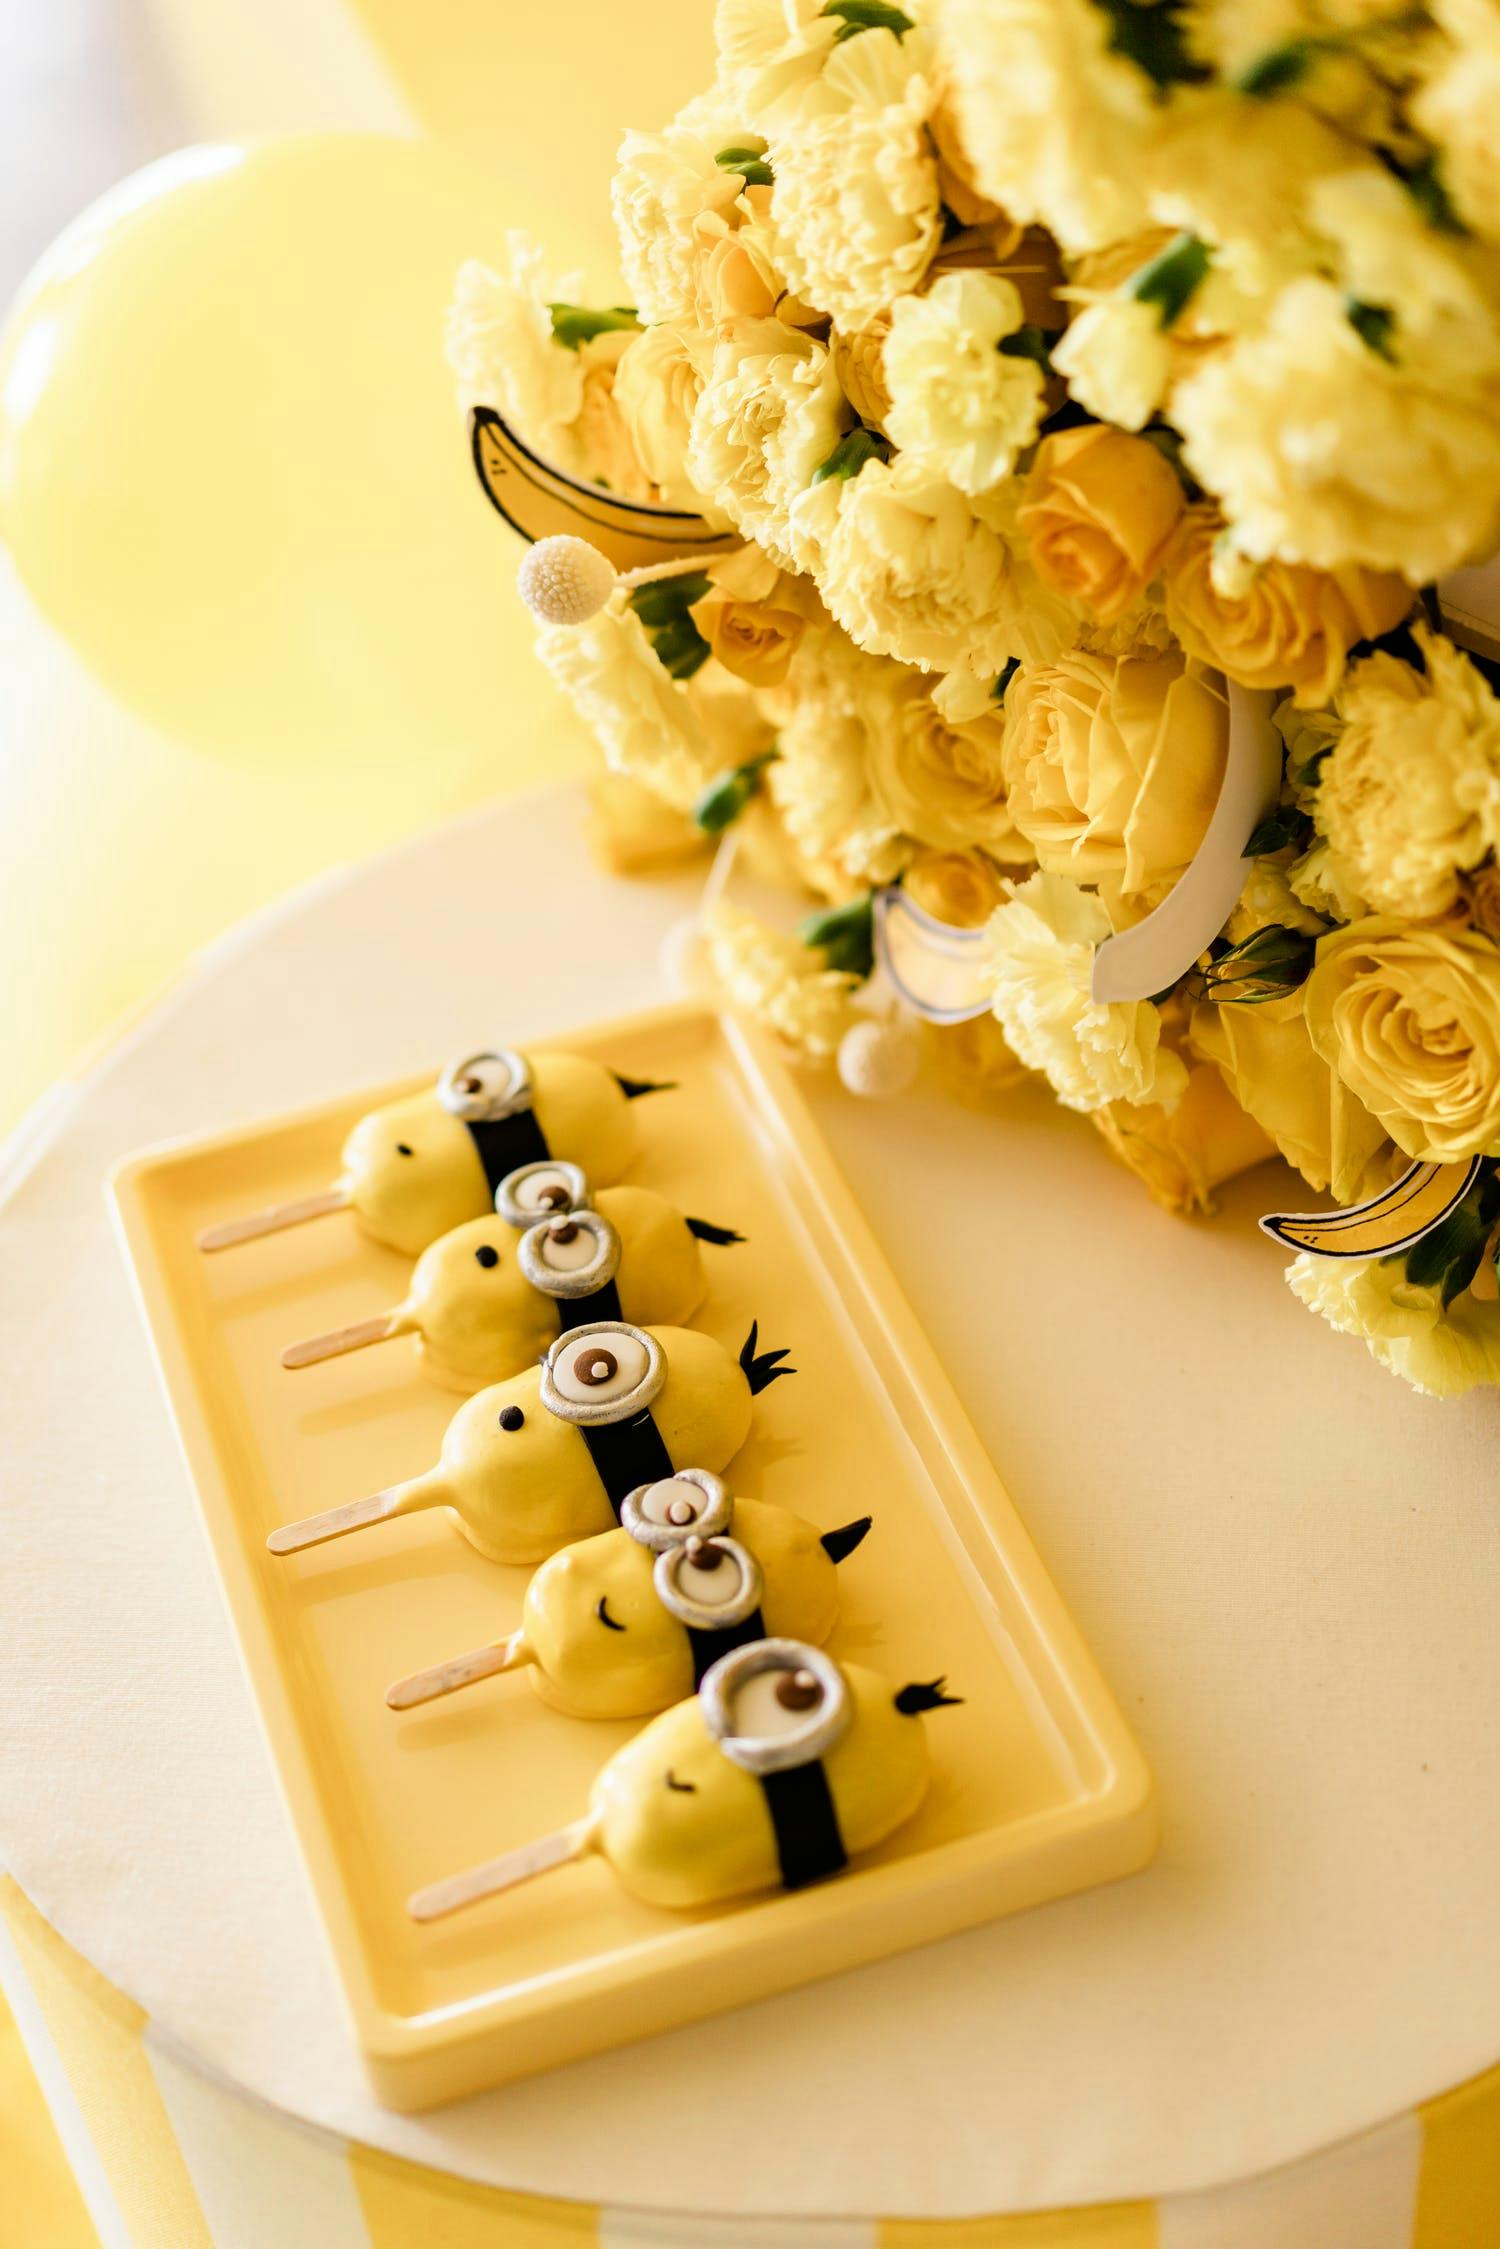 Despicable Me Minions Themes Party With Minions Cake Pops and Yellow Florals | PartySlate